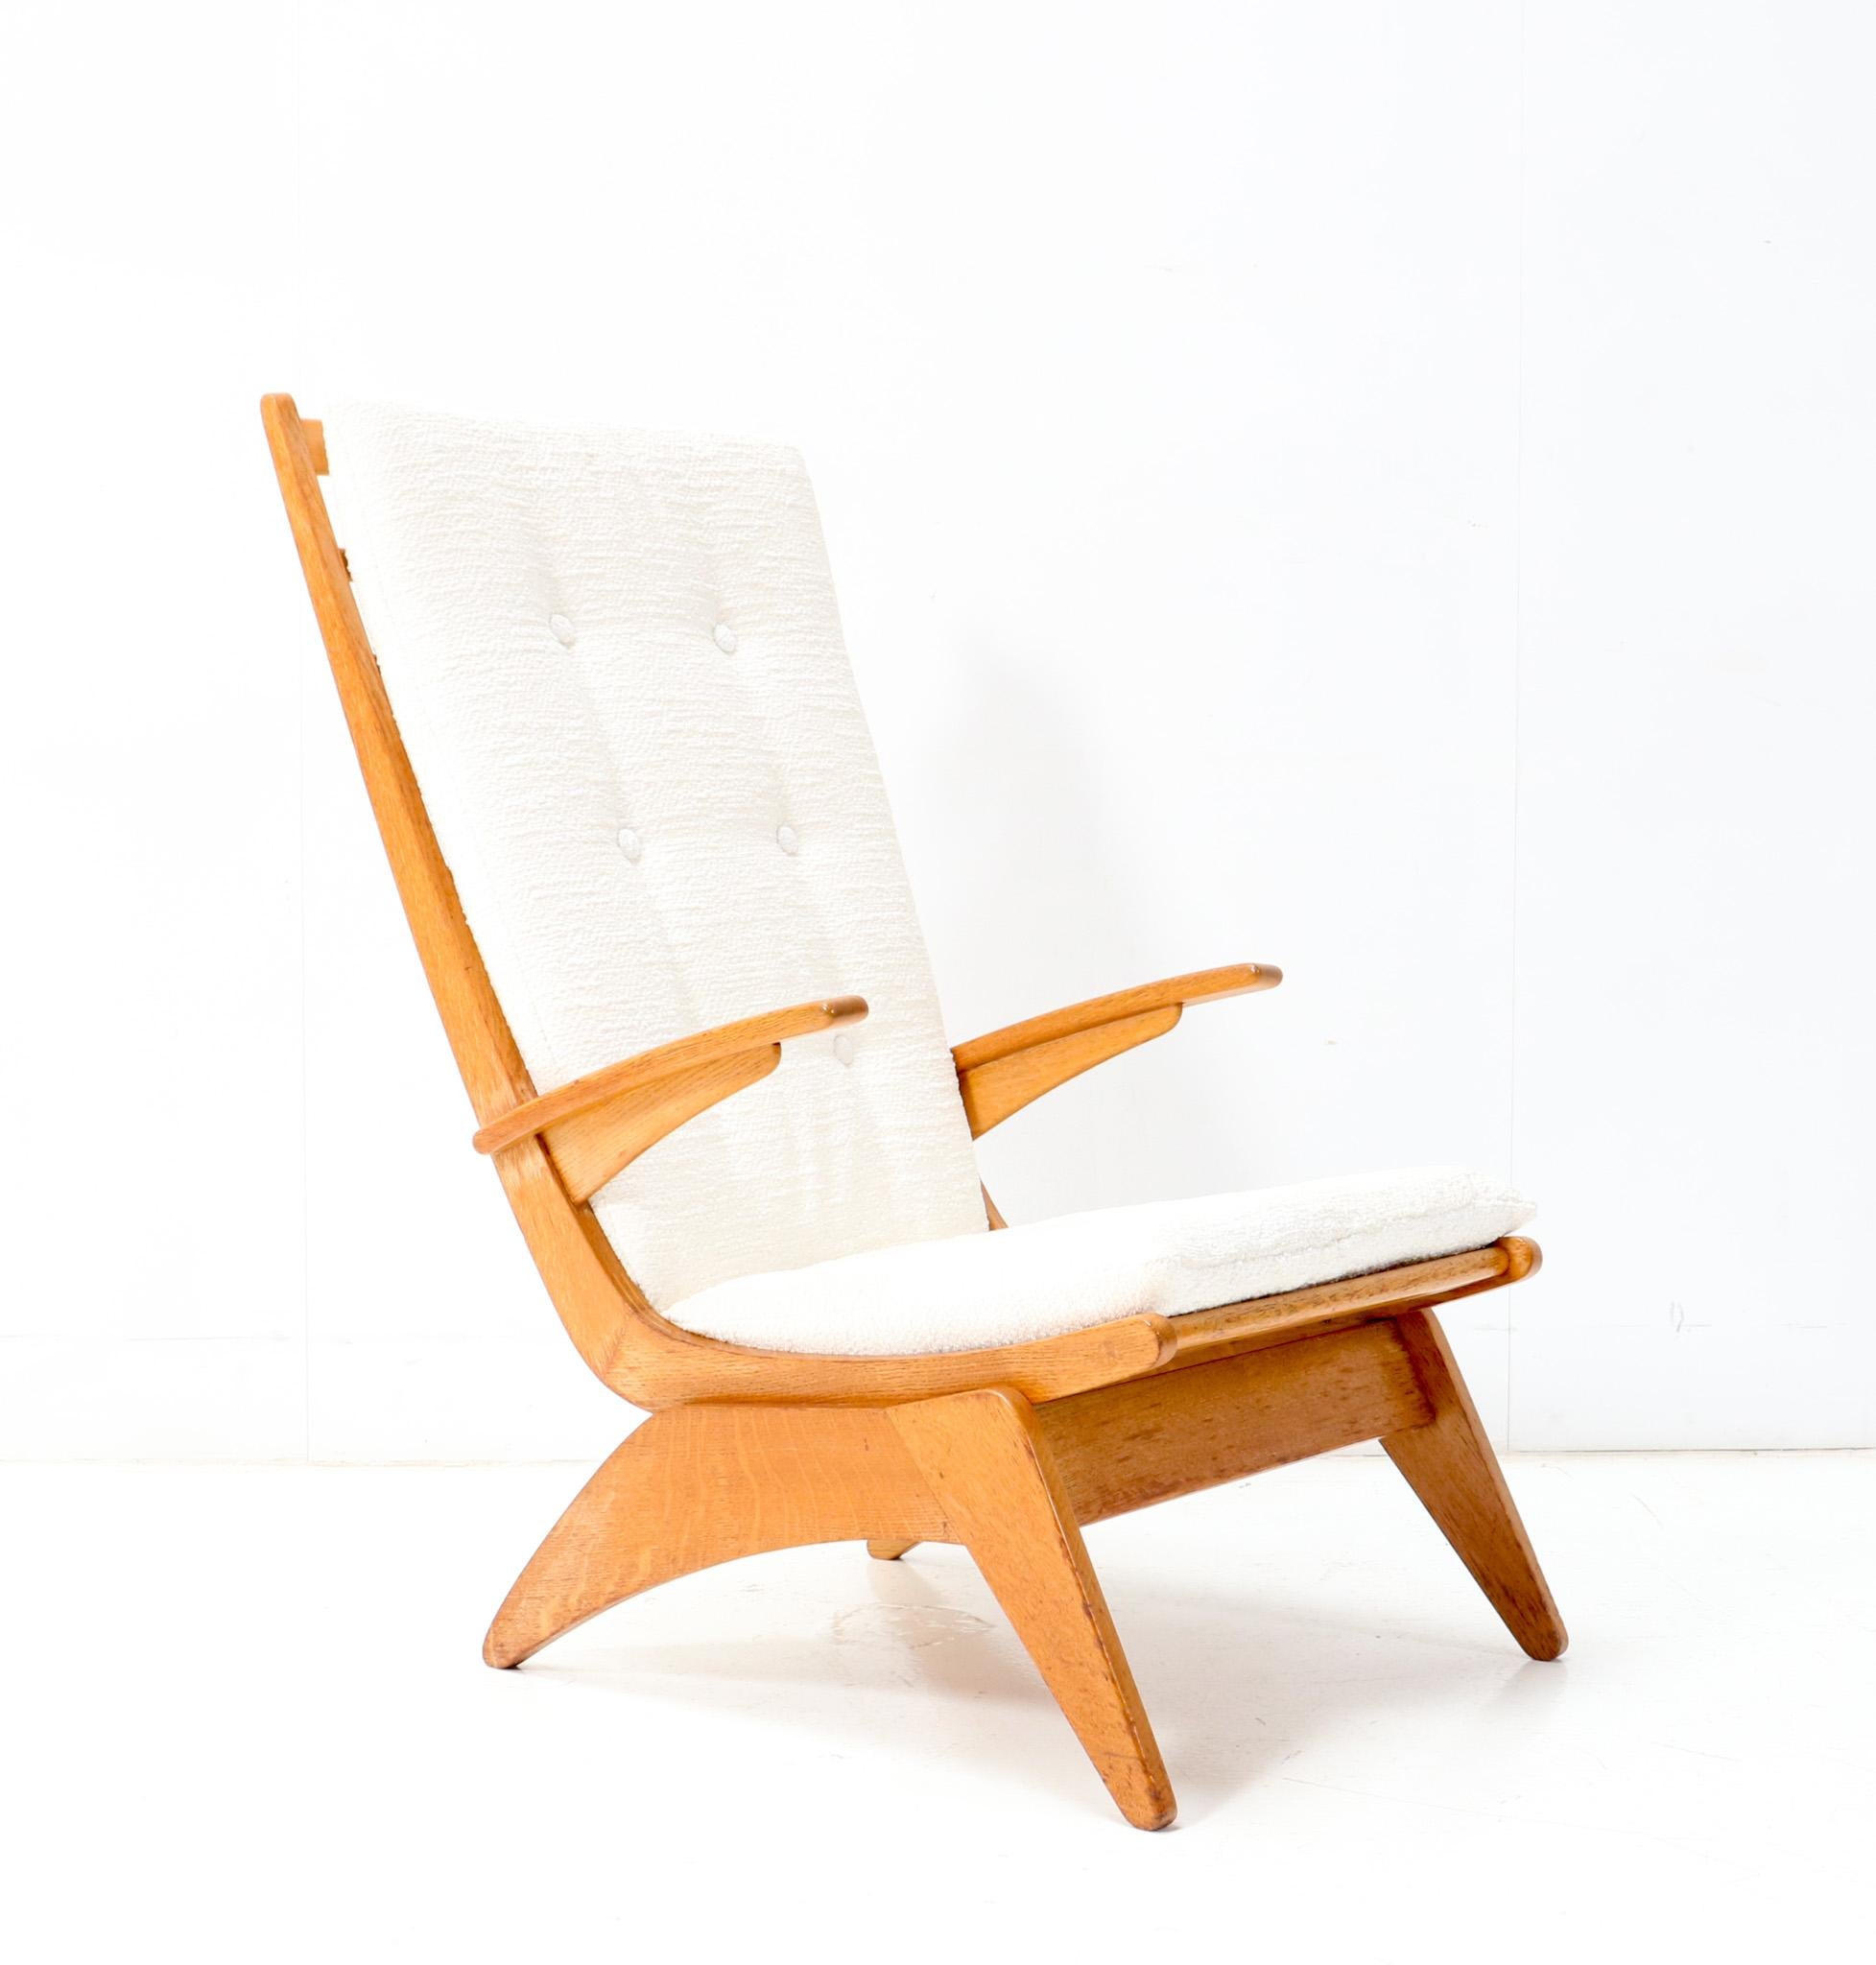 Elegant and rare Mid-Century Modern high back lounge chair.
Design by Jan den Drijver for De Stijl Den Haag.
A true example of Dutch Modern,Jan den Drijver designed this distinctive high back lounge chair in 1948!
Solid oak base with nine horizontal